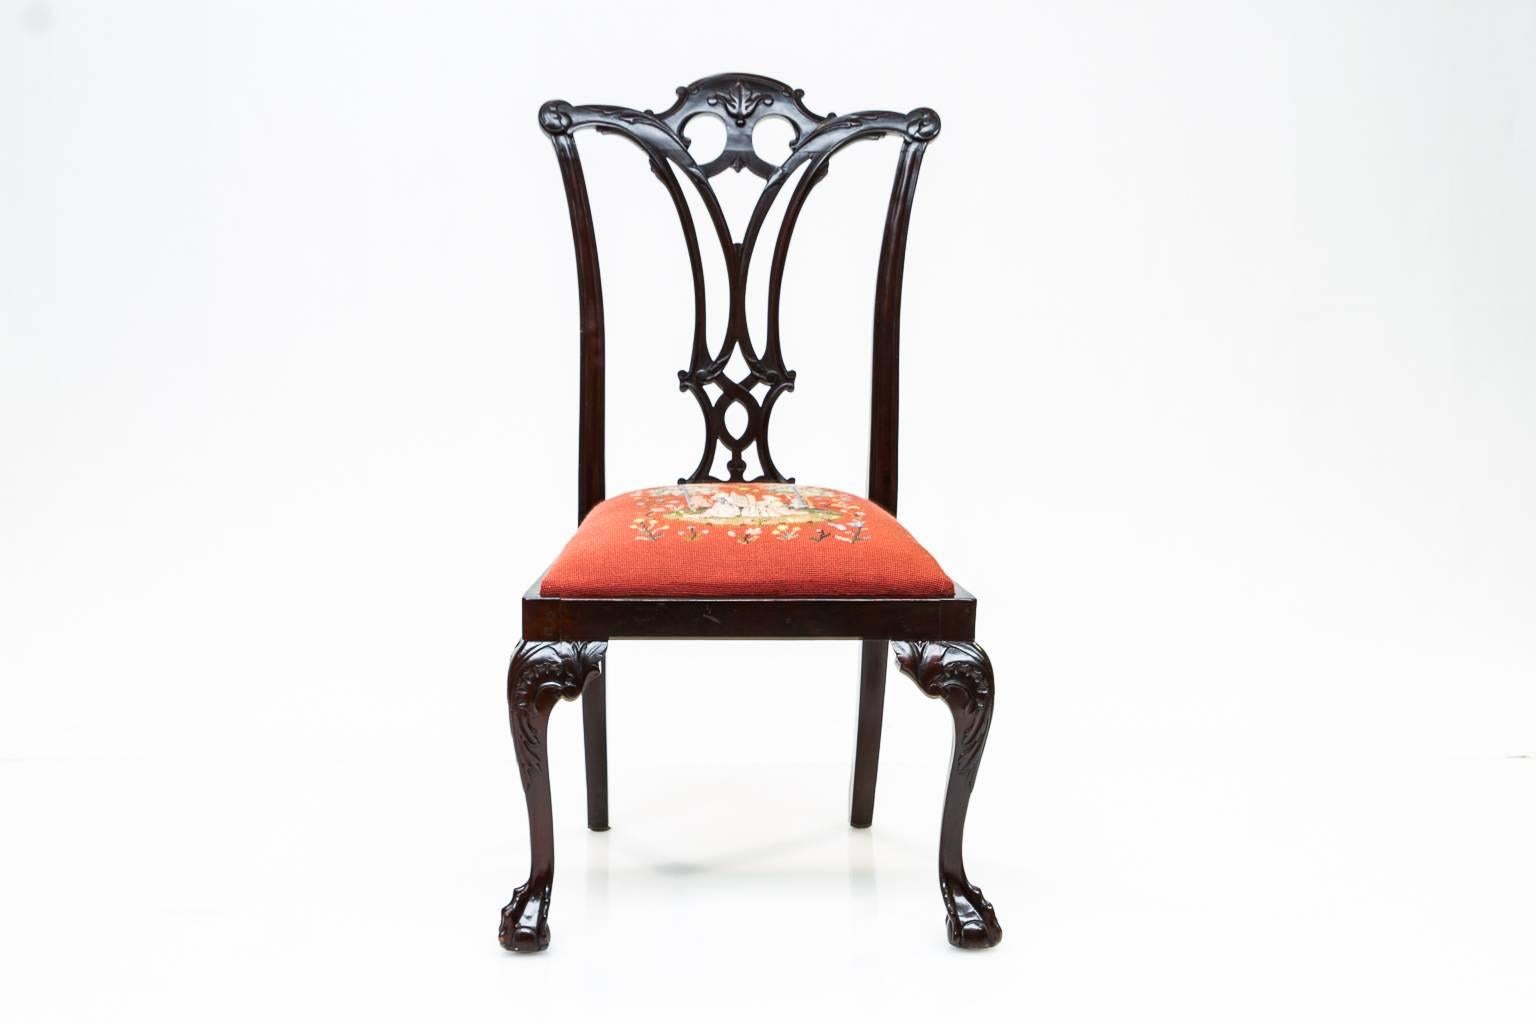 19th century set of six Chippendale style mahogany side chairs. Each chair has been waxed and checked for stability. These are ready to use. Beautiful rich dark mahogany color almost a black. Back are pierced and splat is sturdy. Front legs are